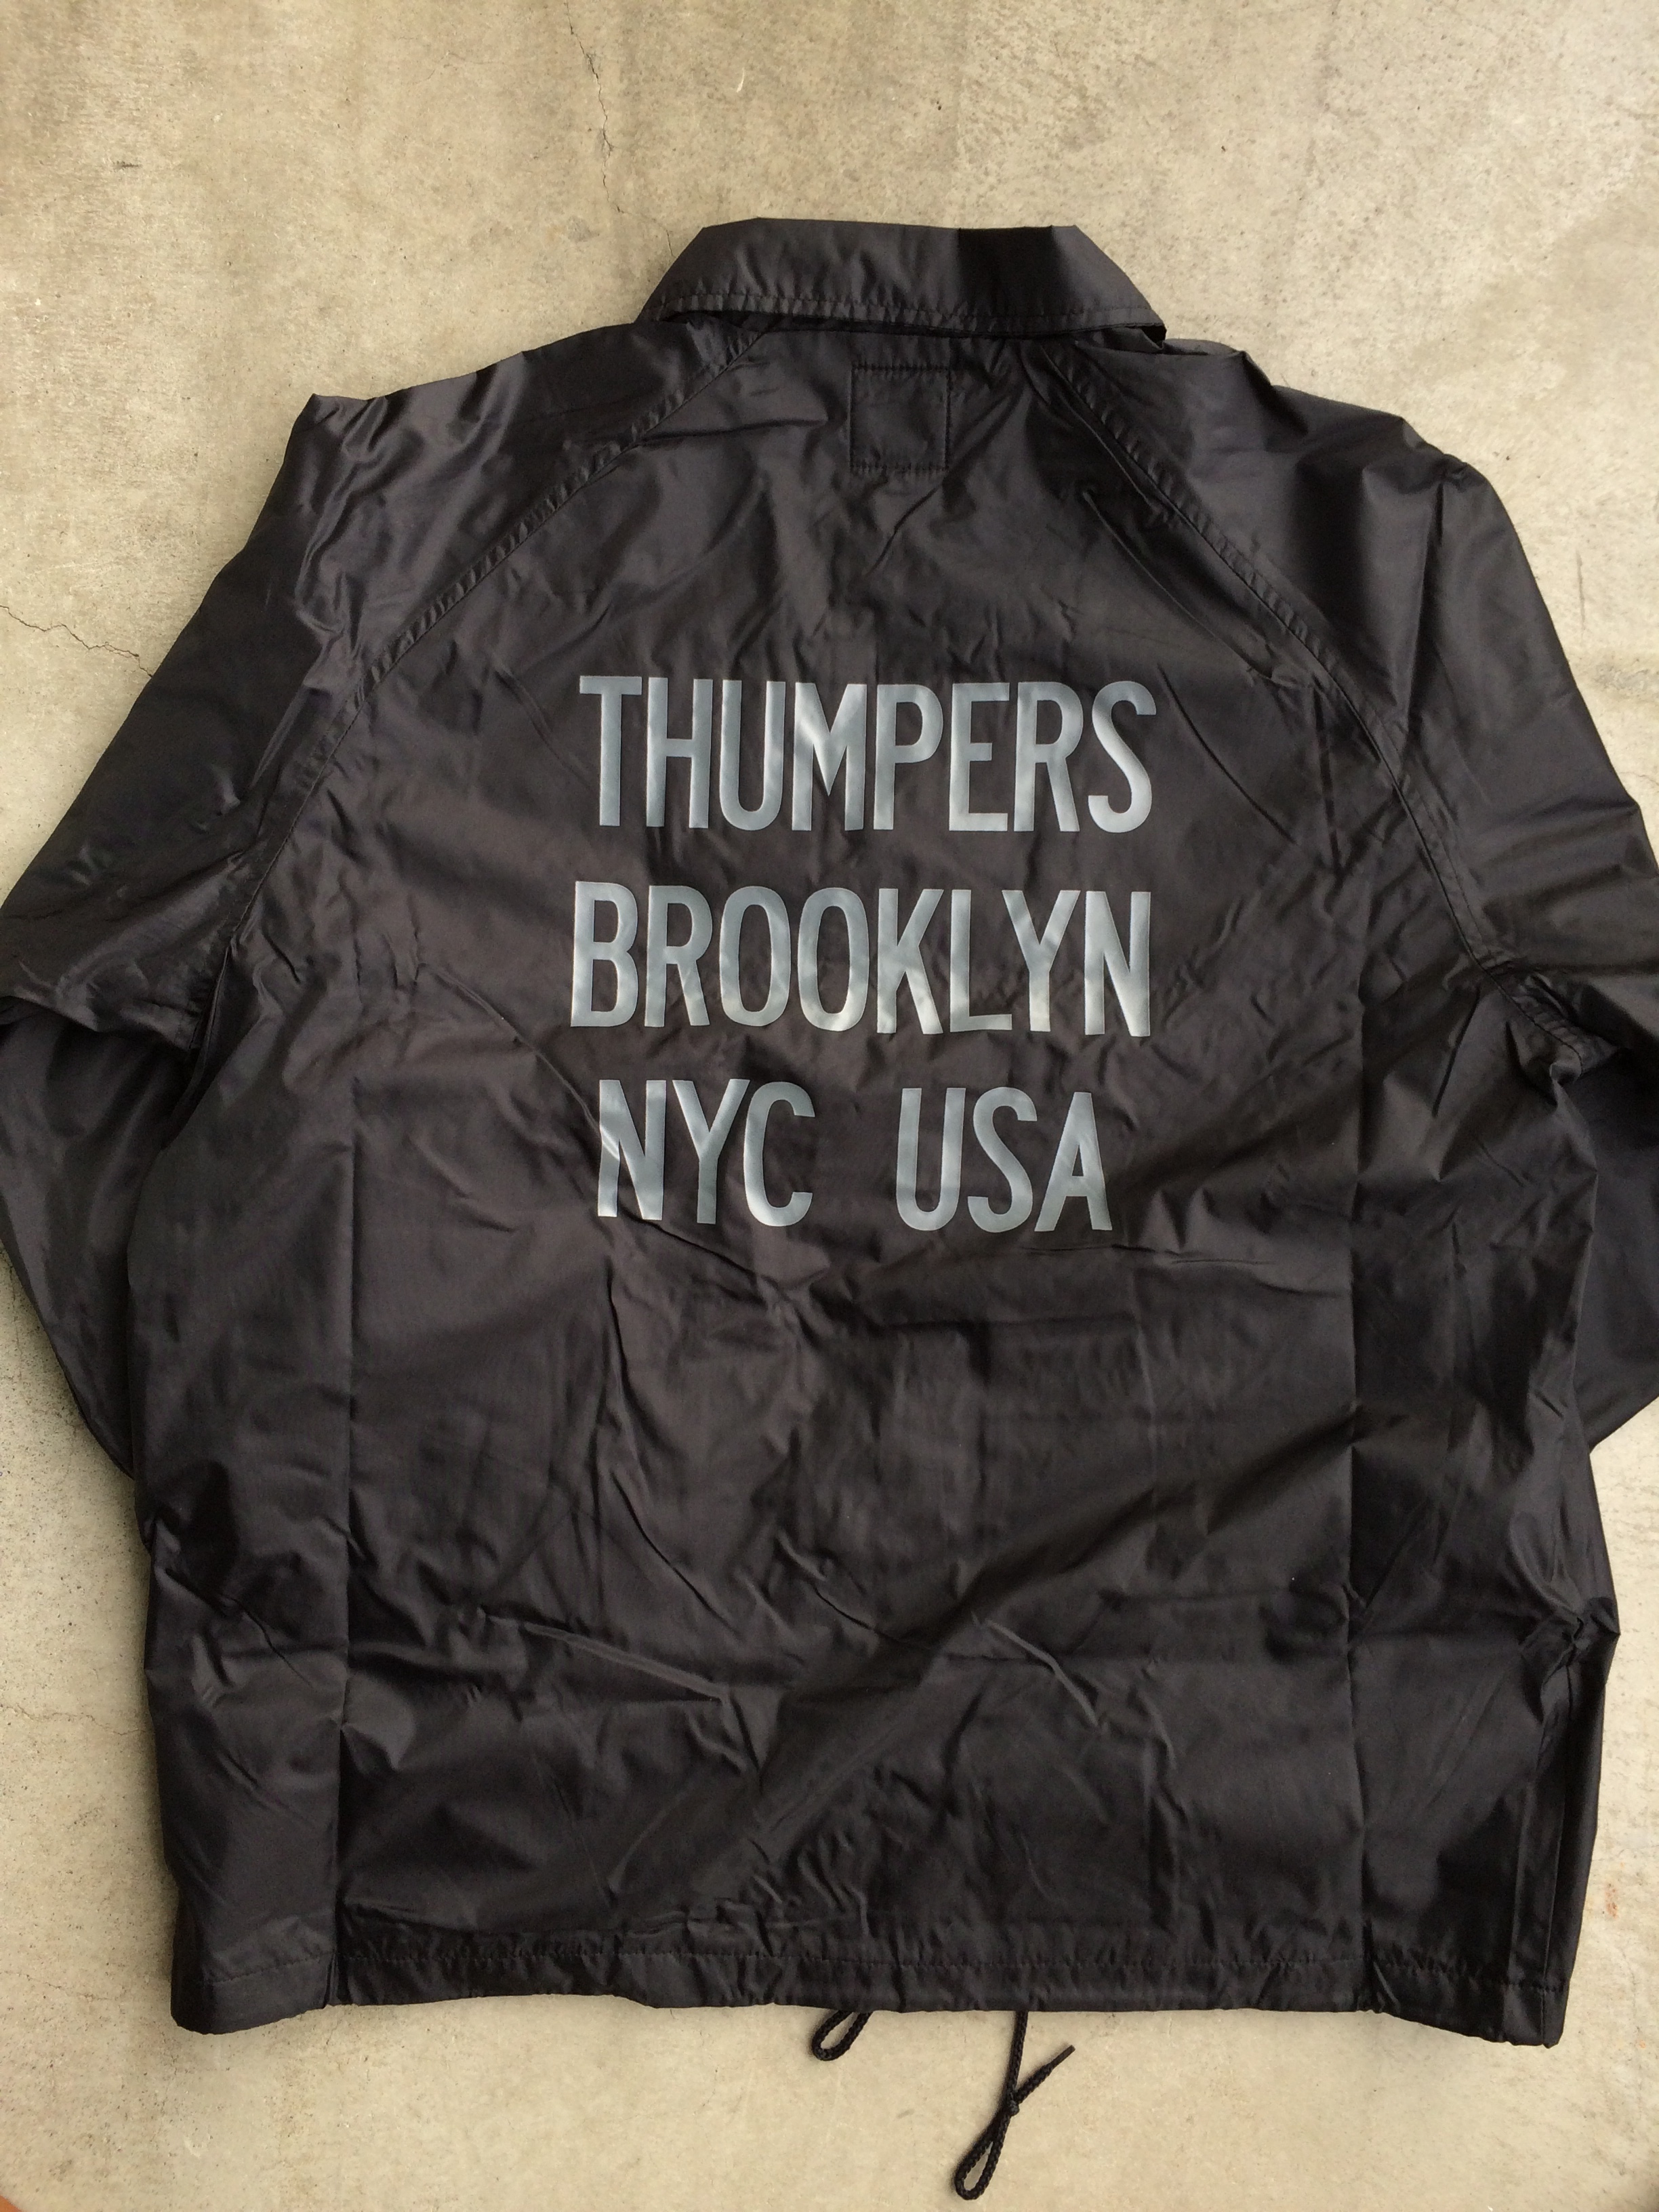 THUMPERS BROOKLYN NYC USA コーチジャケット 黒 青